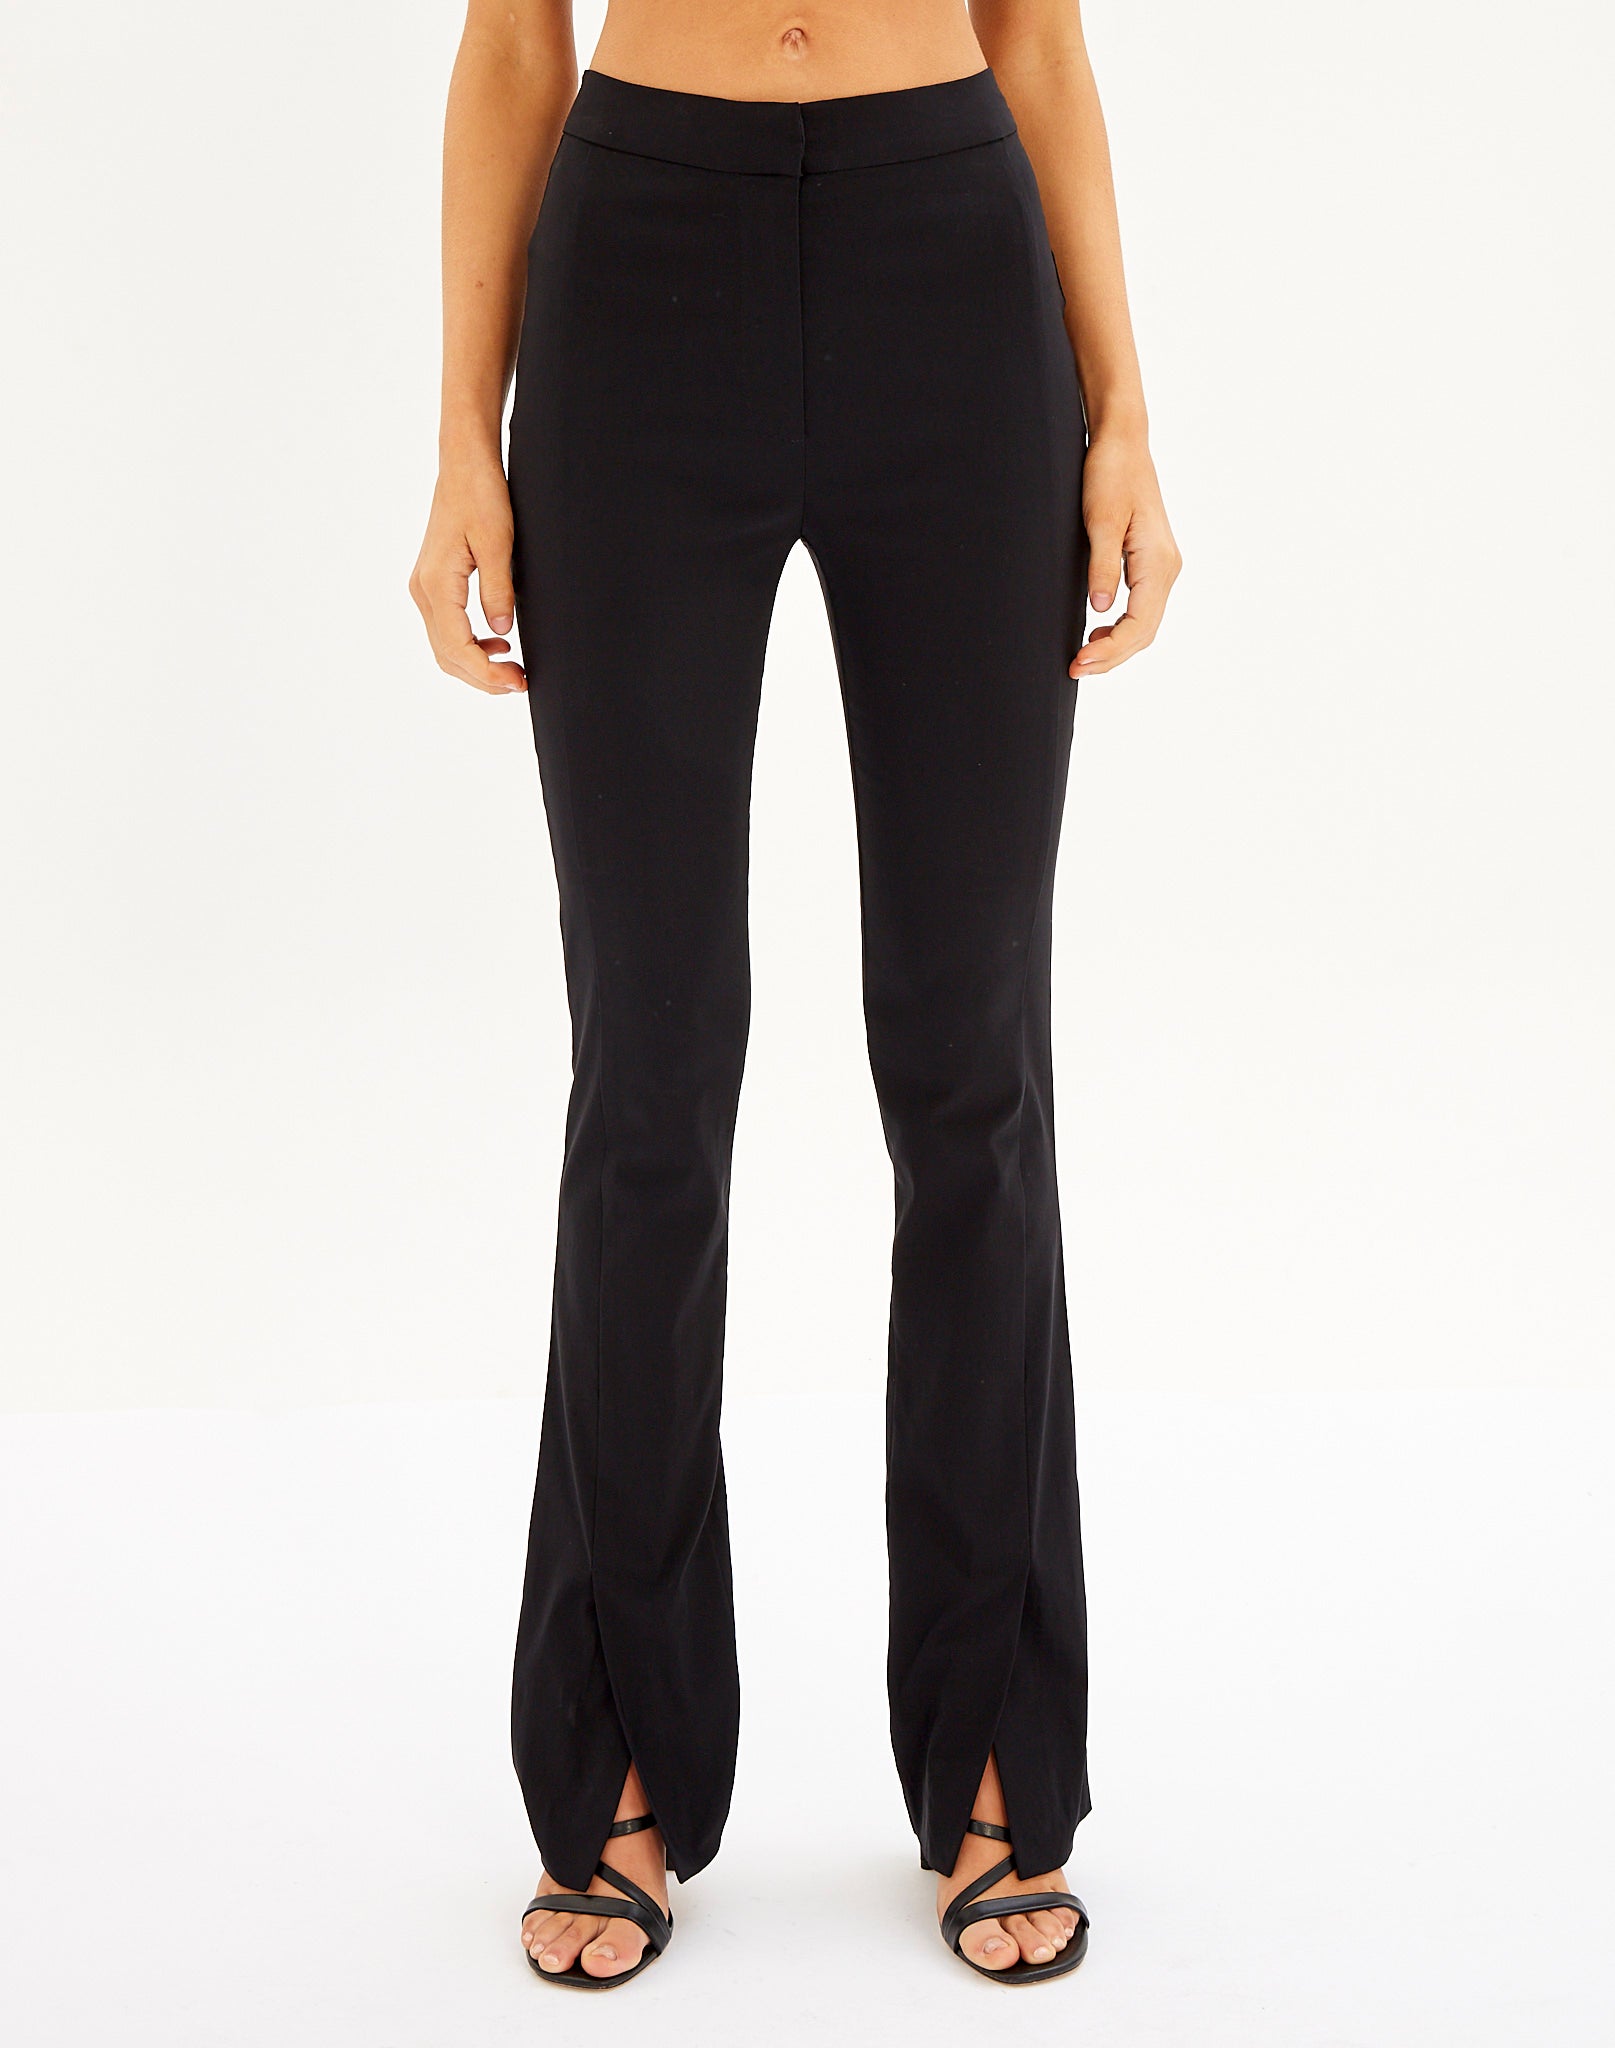 Mid Rise Front Split Flare Pant in Black